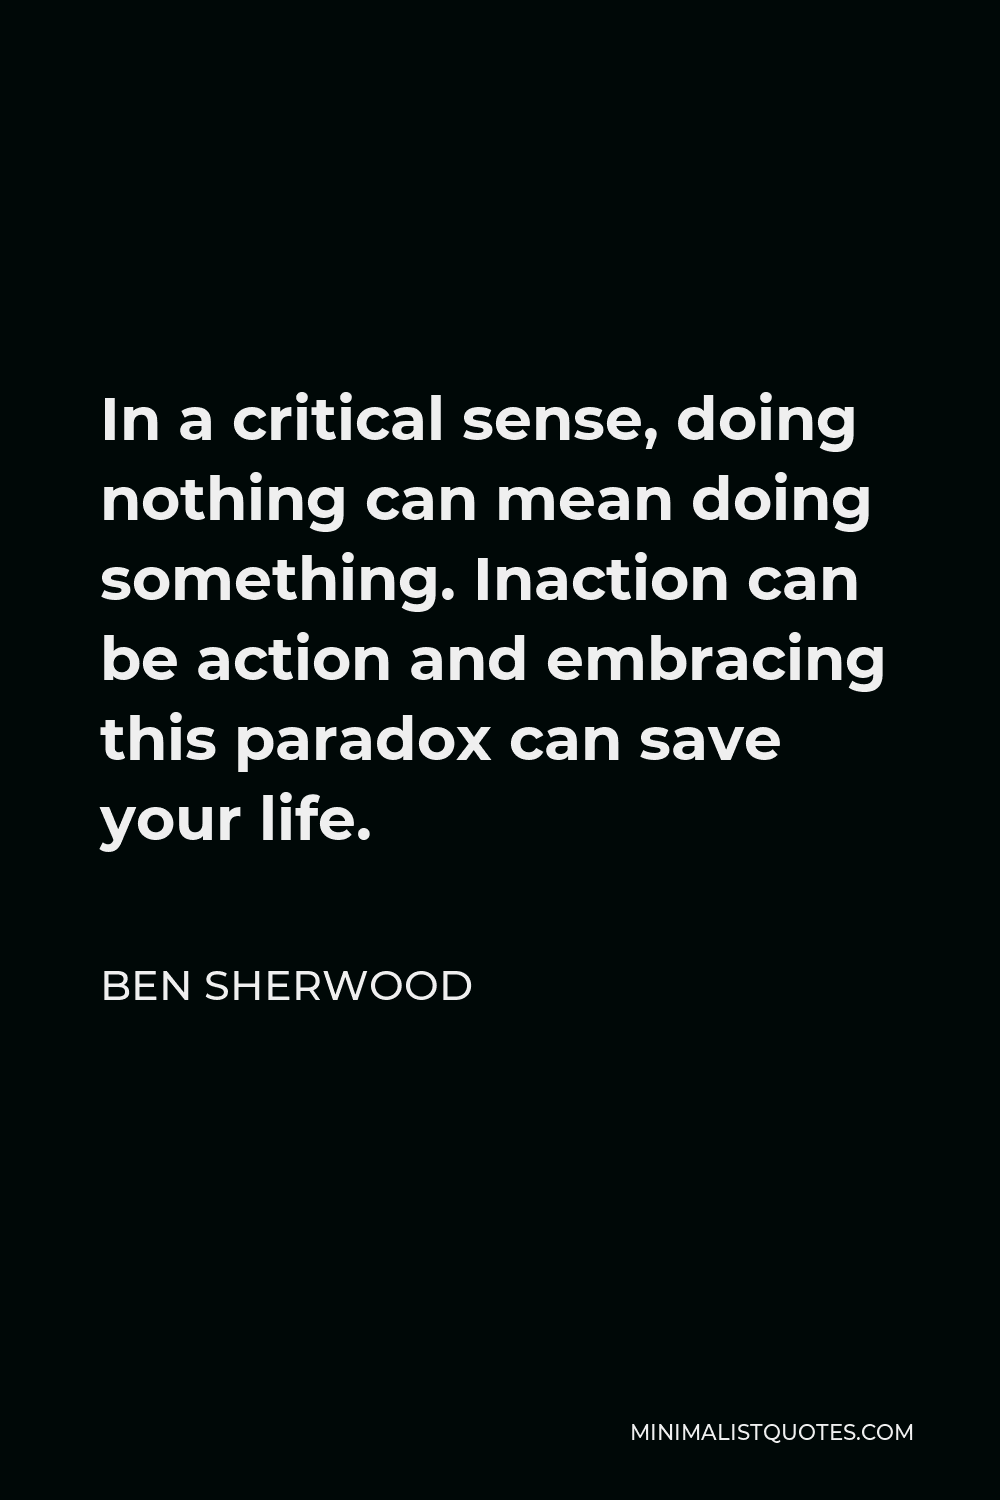 Ben Sherwood Quote - In a critical sense, doing nothing can mean doing something. Inaction can be action and embracing this paradox can save your life.